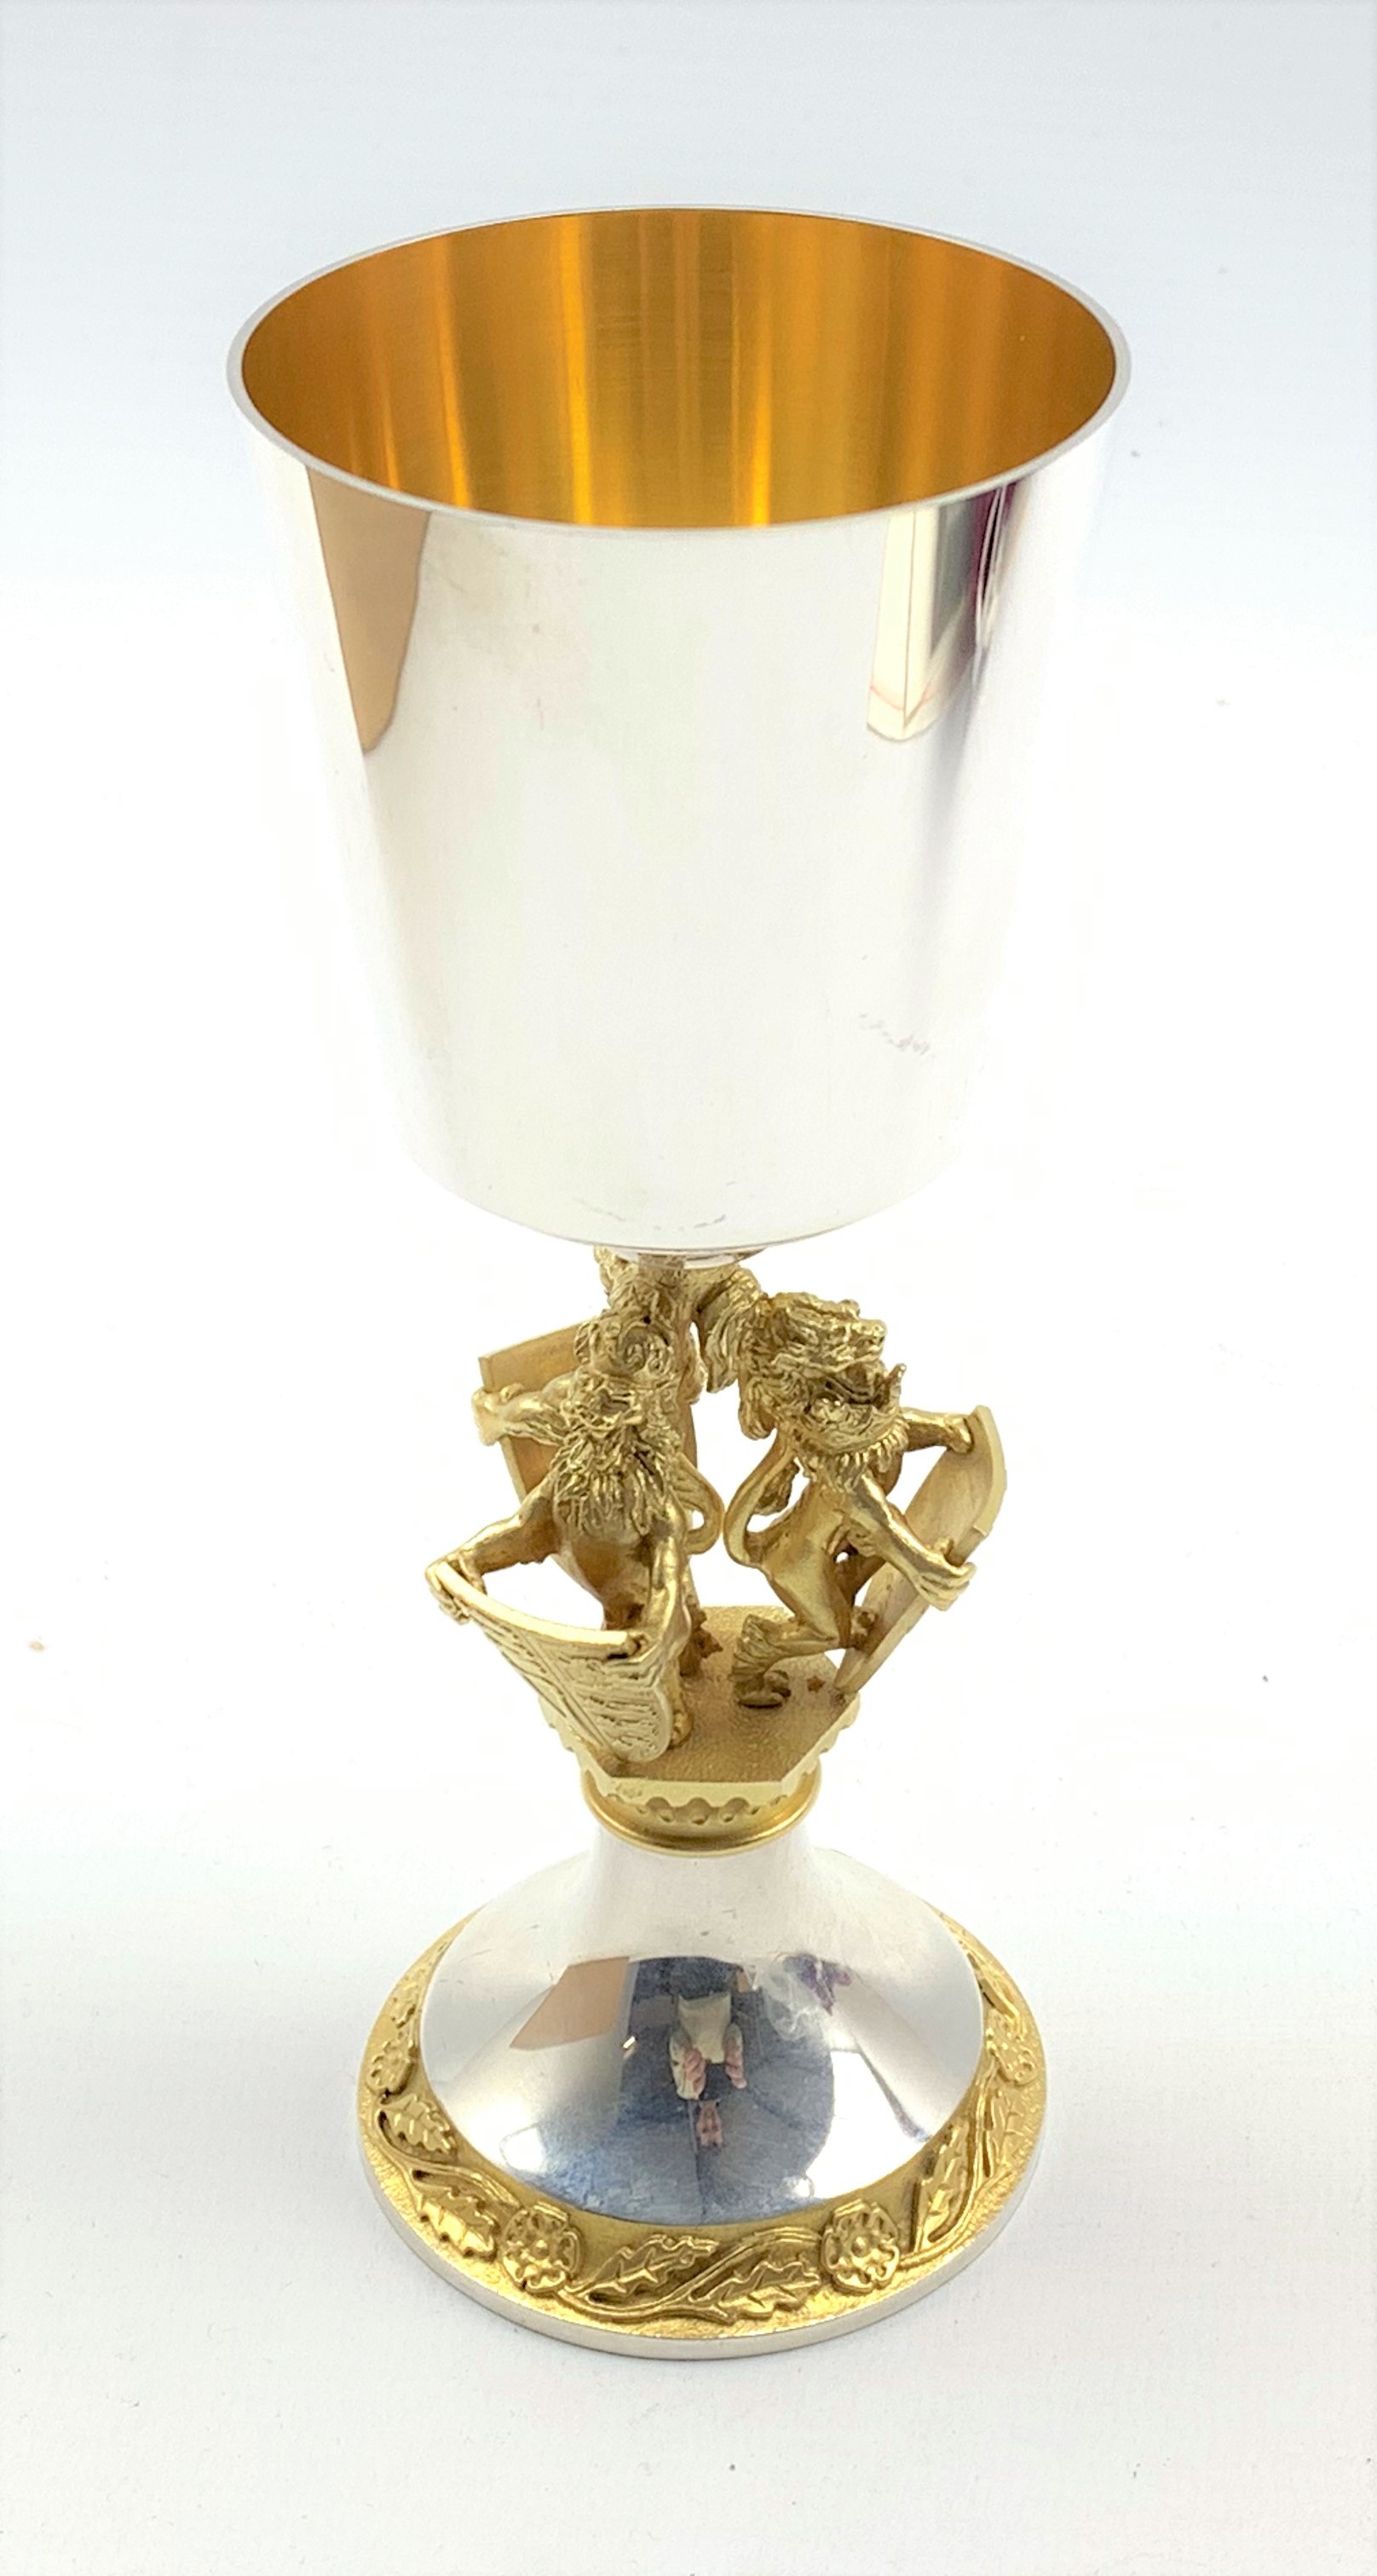 Elizabeth II silver and silver gilt limited edition 'Herald's Goblet' commemorating the